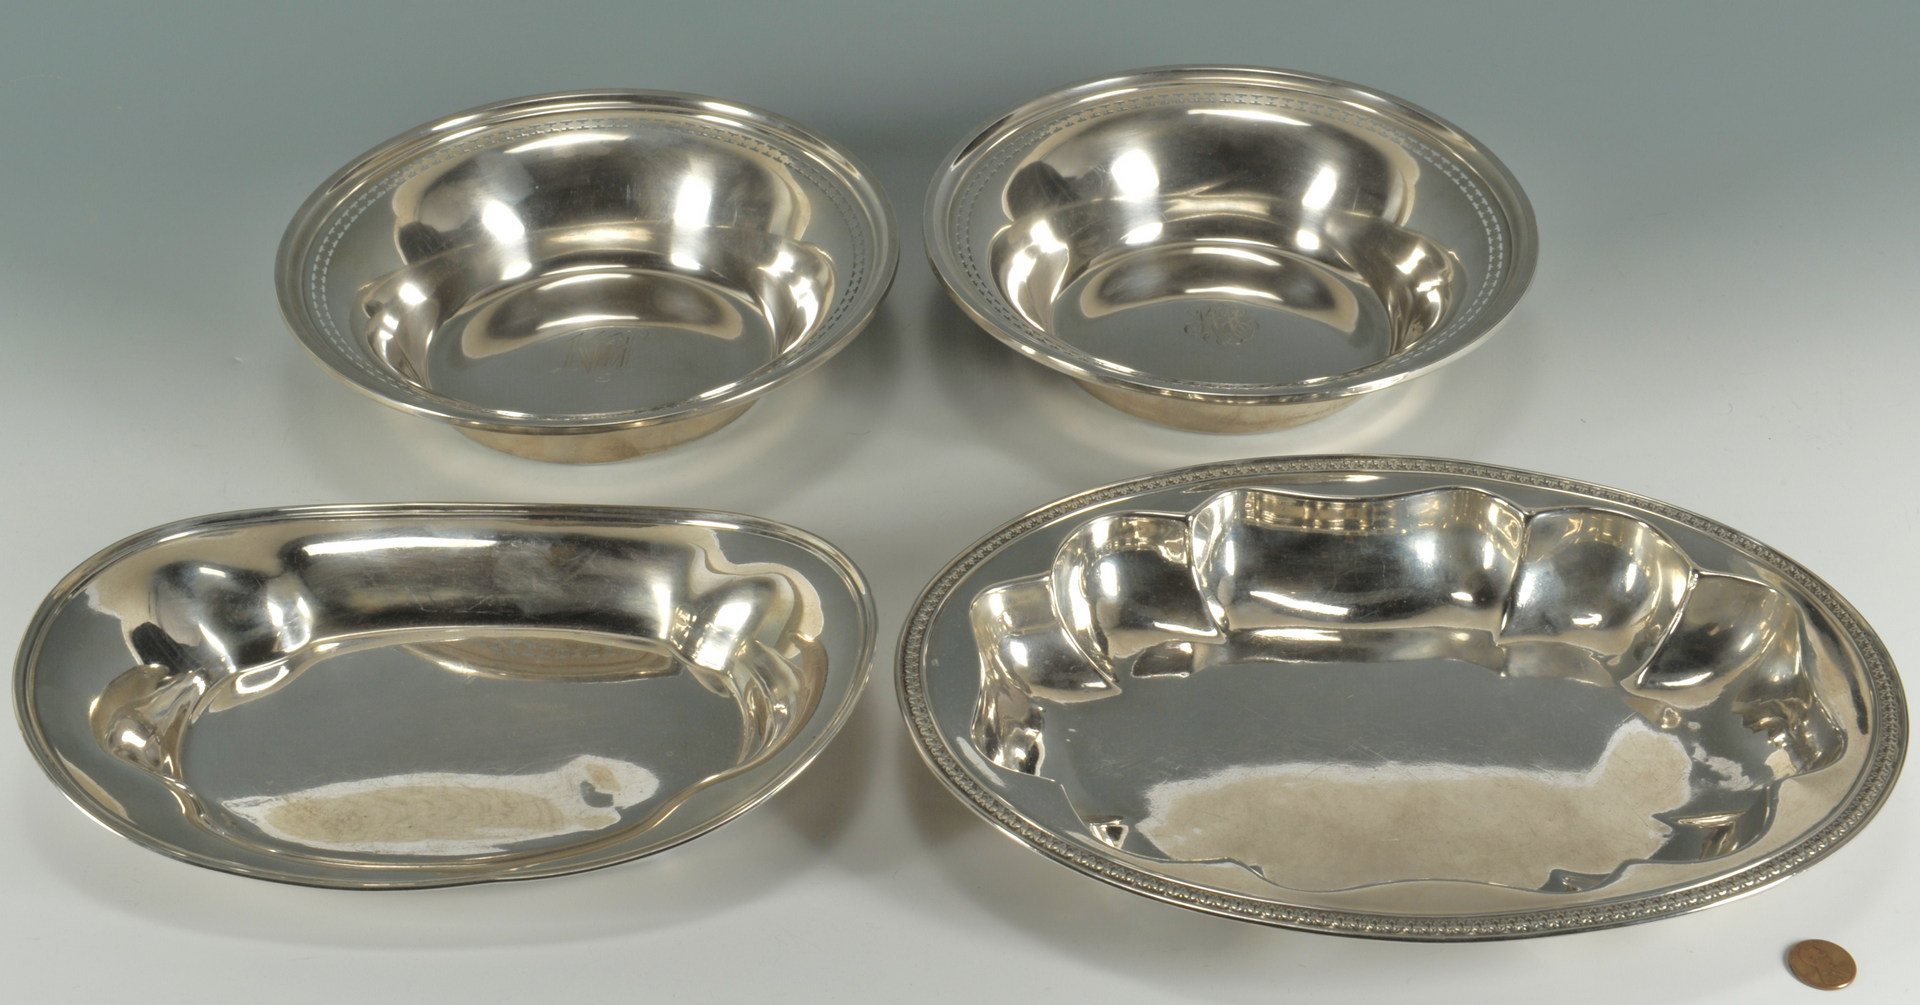 Lot 238: 4 pcs Sterling hollowware: bowls and bread trays